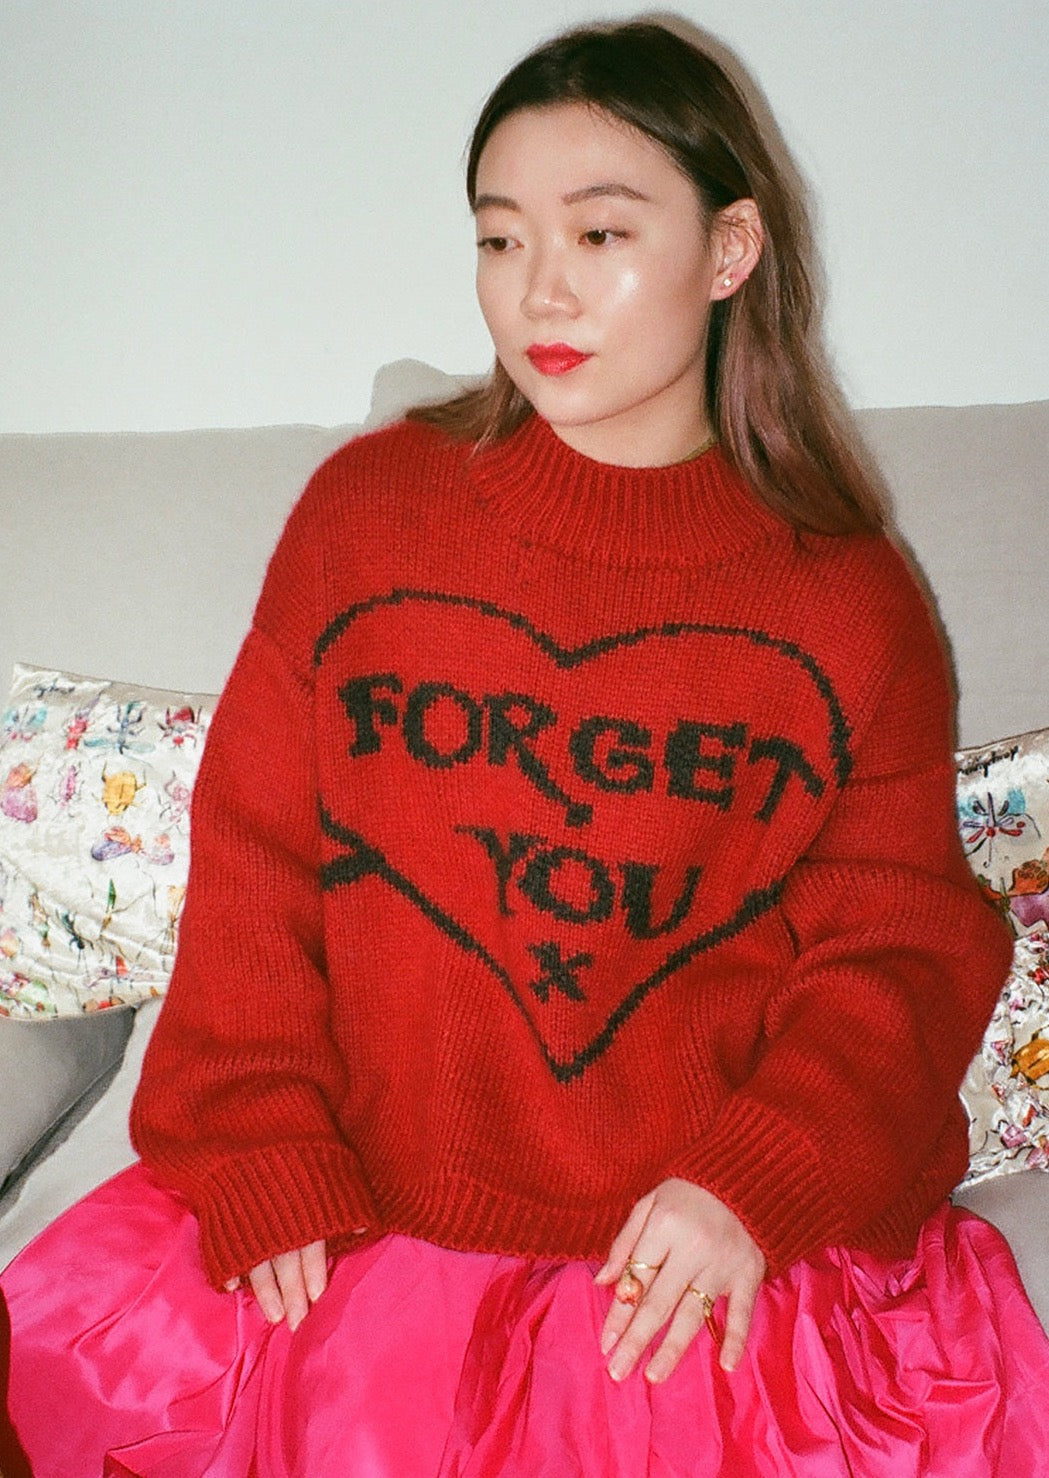 Scarlet red mock mock neck sweater with signature jacquarded "Forget You" heart motif.